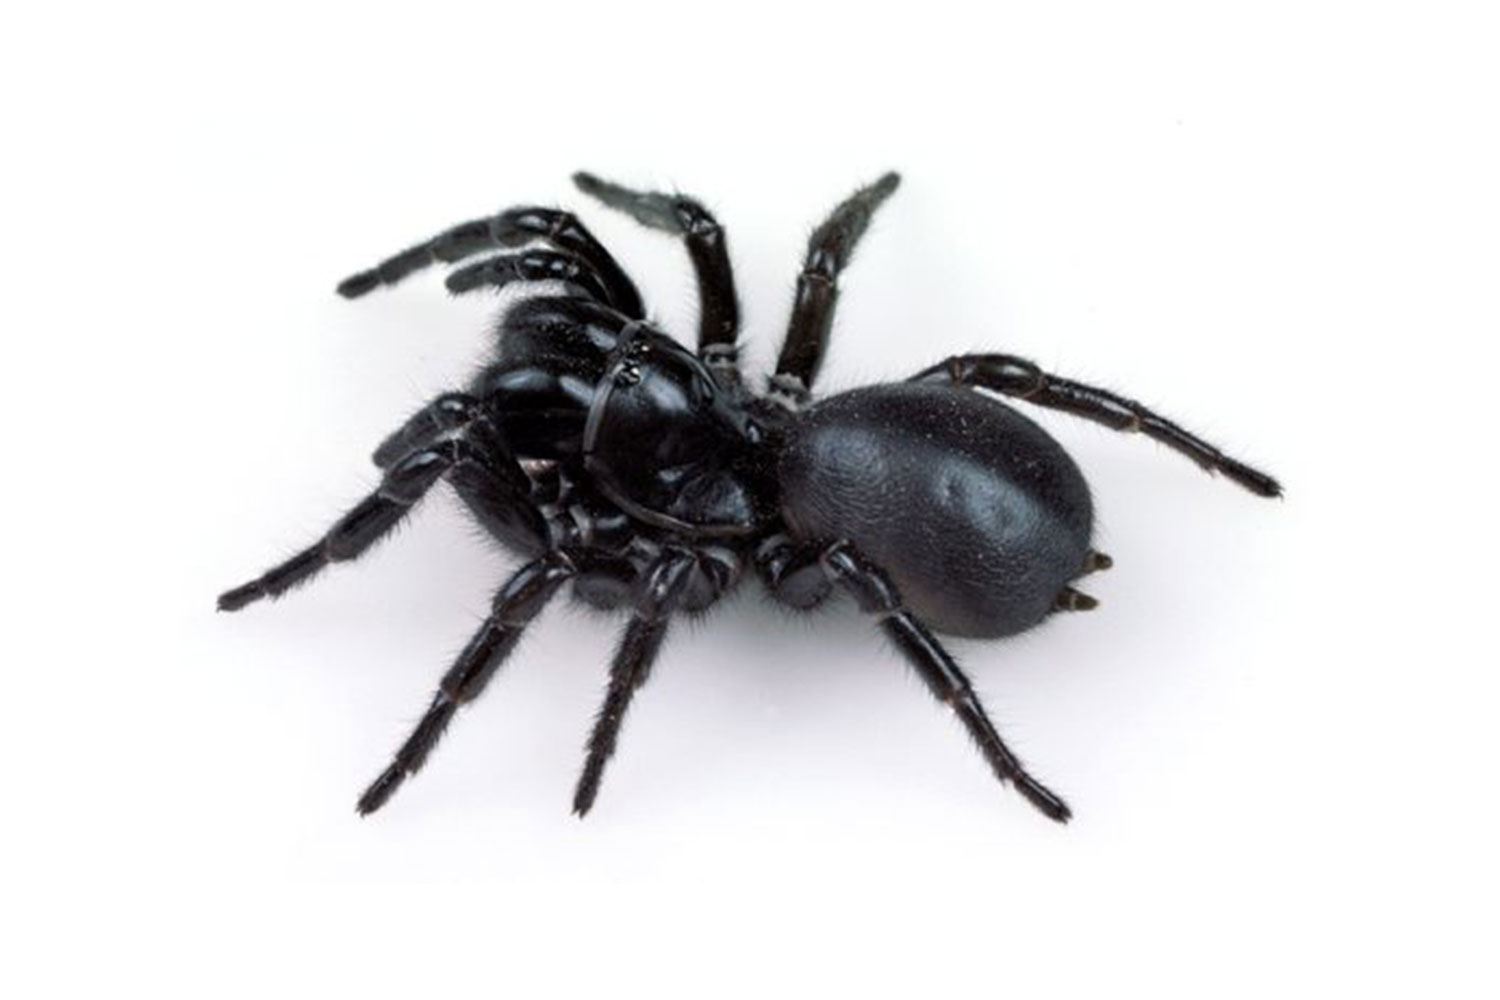 What to do if someone is bitten by a funnel web spider ...